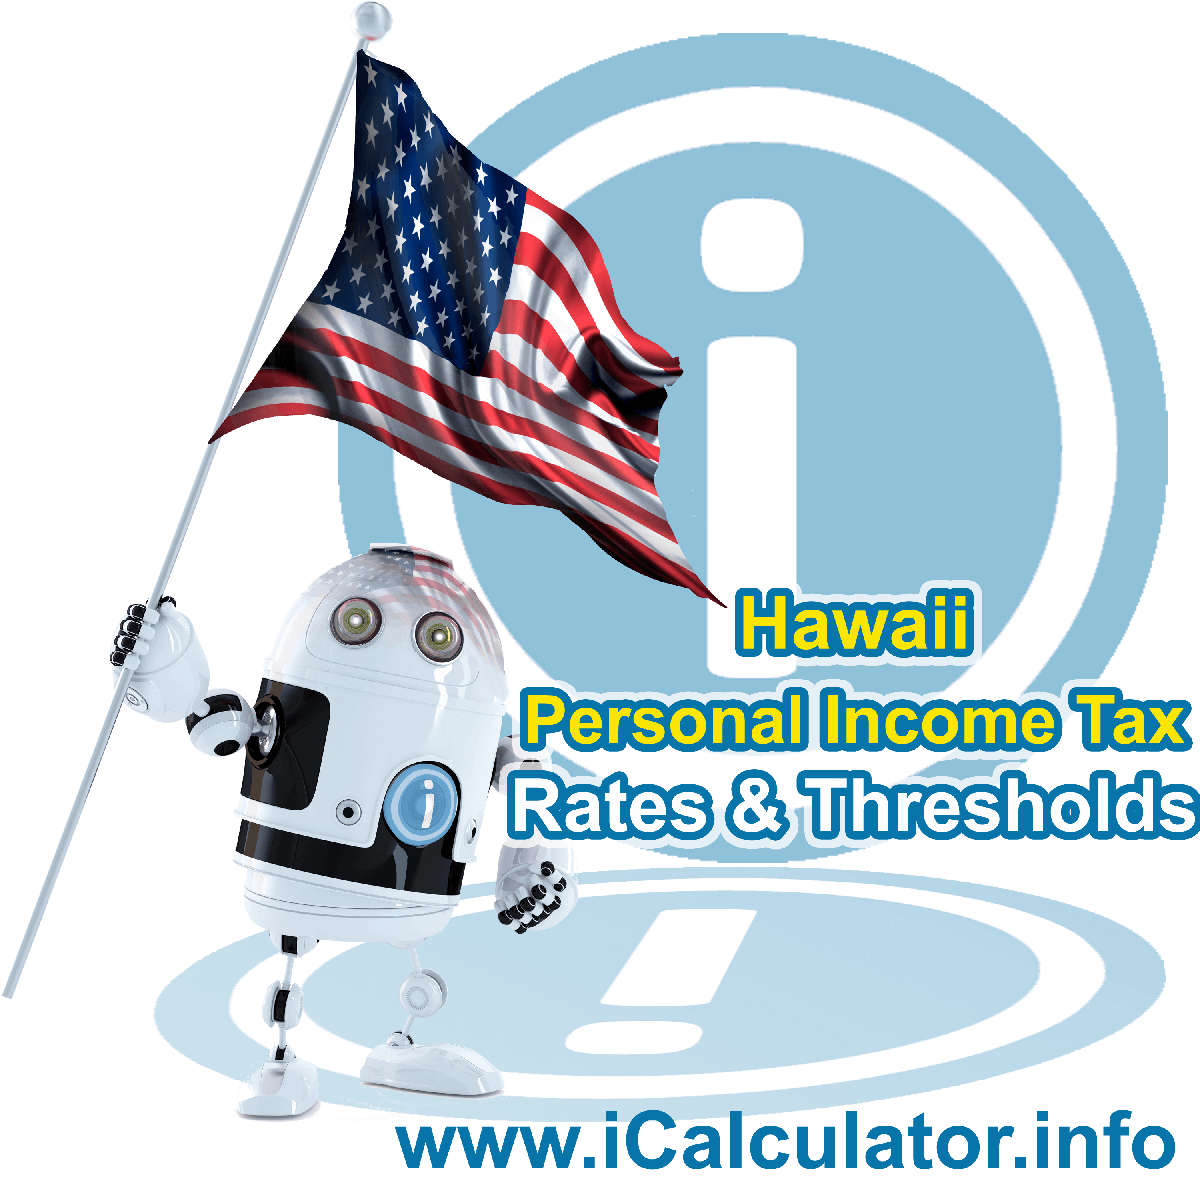 Hawaii State Tax Tables 2017. This image displays details of the Hawaii State Tax Tables for the 2017 tax return year which is provided in support of the 2017 US Tax Calculator